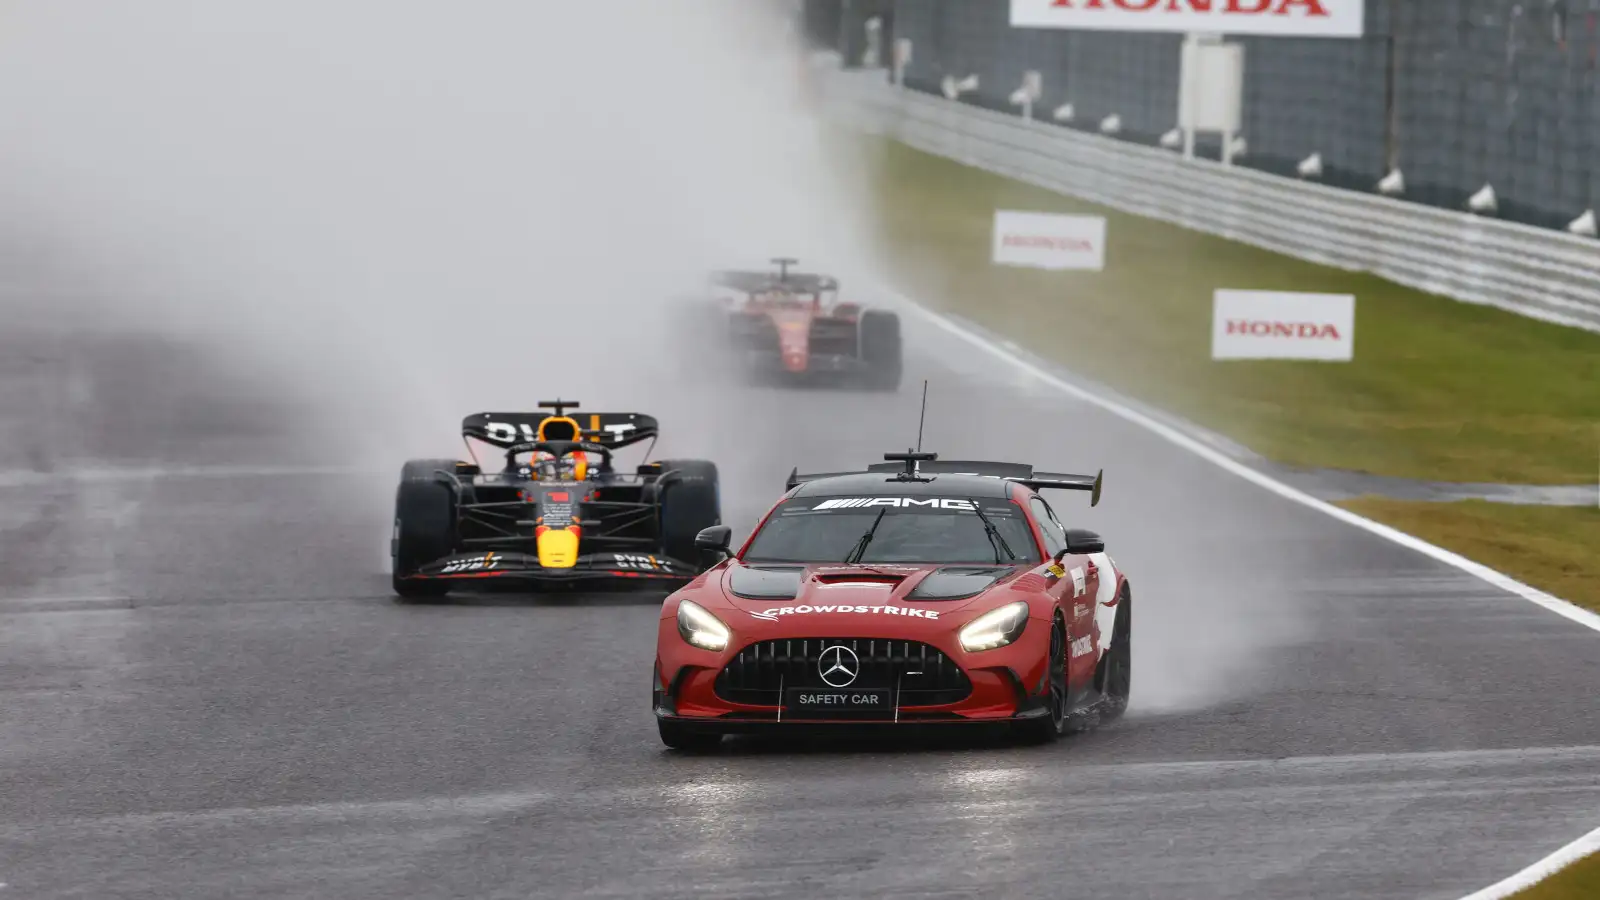 The FIA Mercedes Safety Car leads Max Verstappen, a lot of spray. Japan October 2022